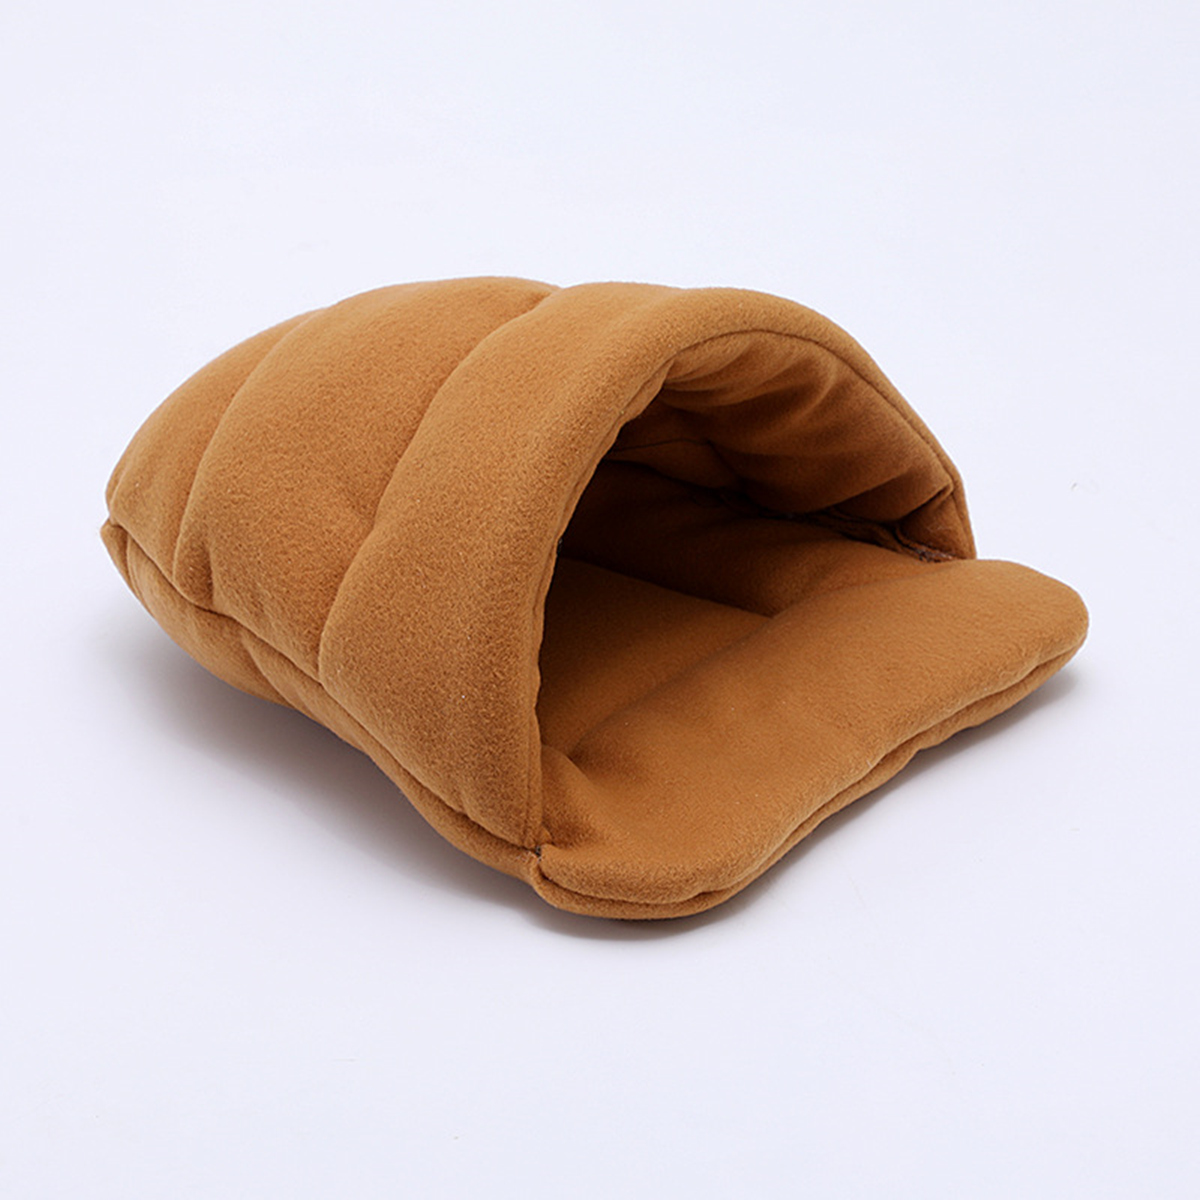 Pet-Cat-Dog-House-Kennel-Puppy-Cave-Sleeping-Bed-Super-Soft-Mat-Pad-Warm-Nest-1363191-10